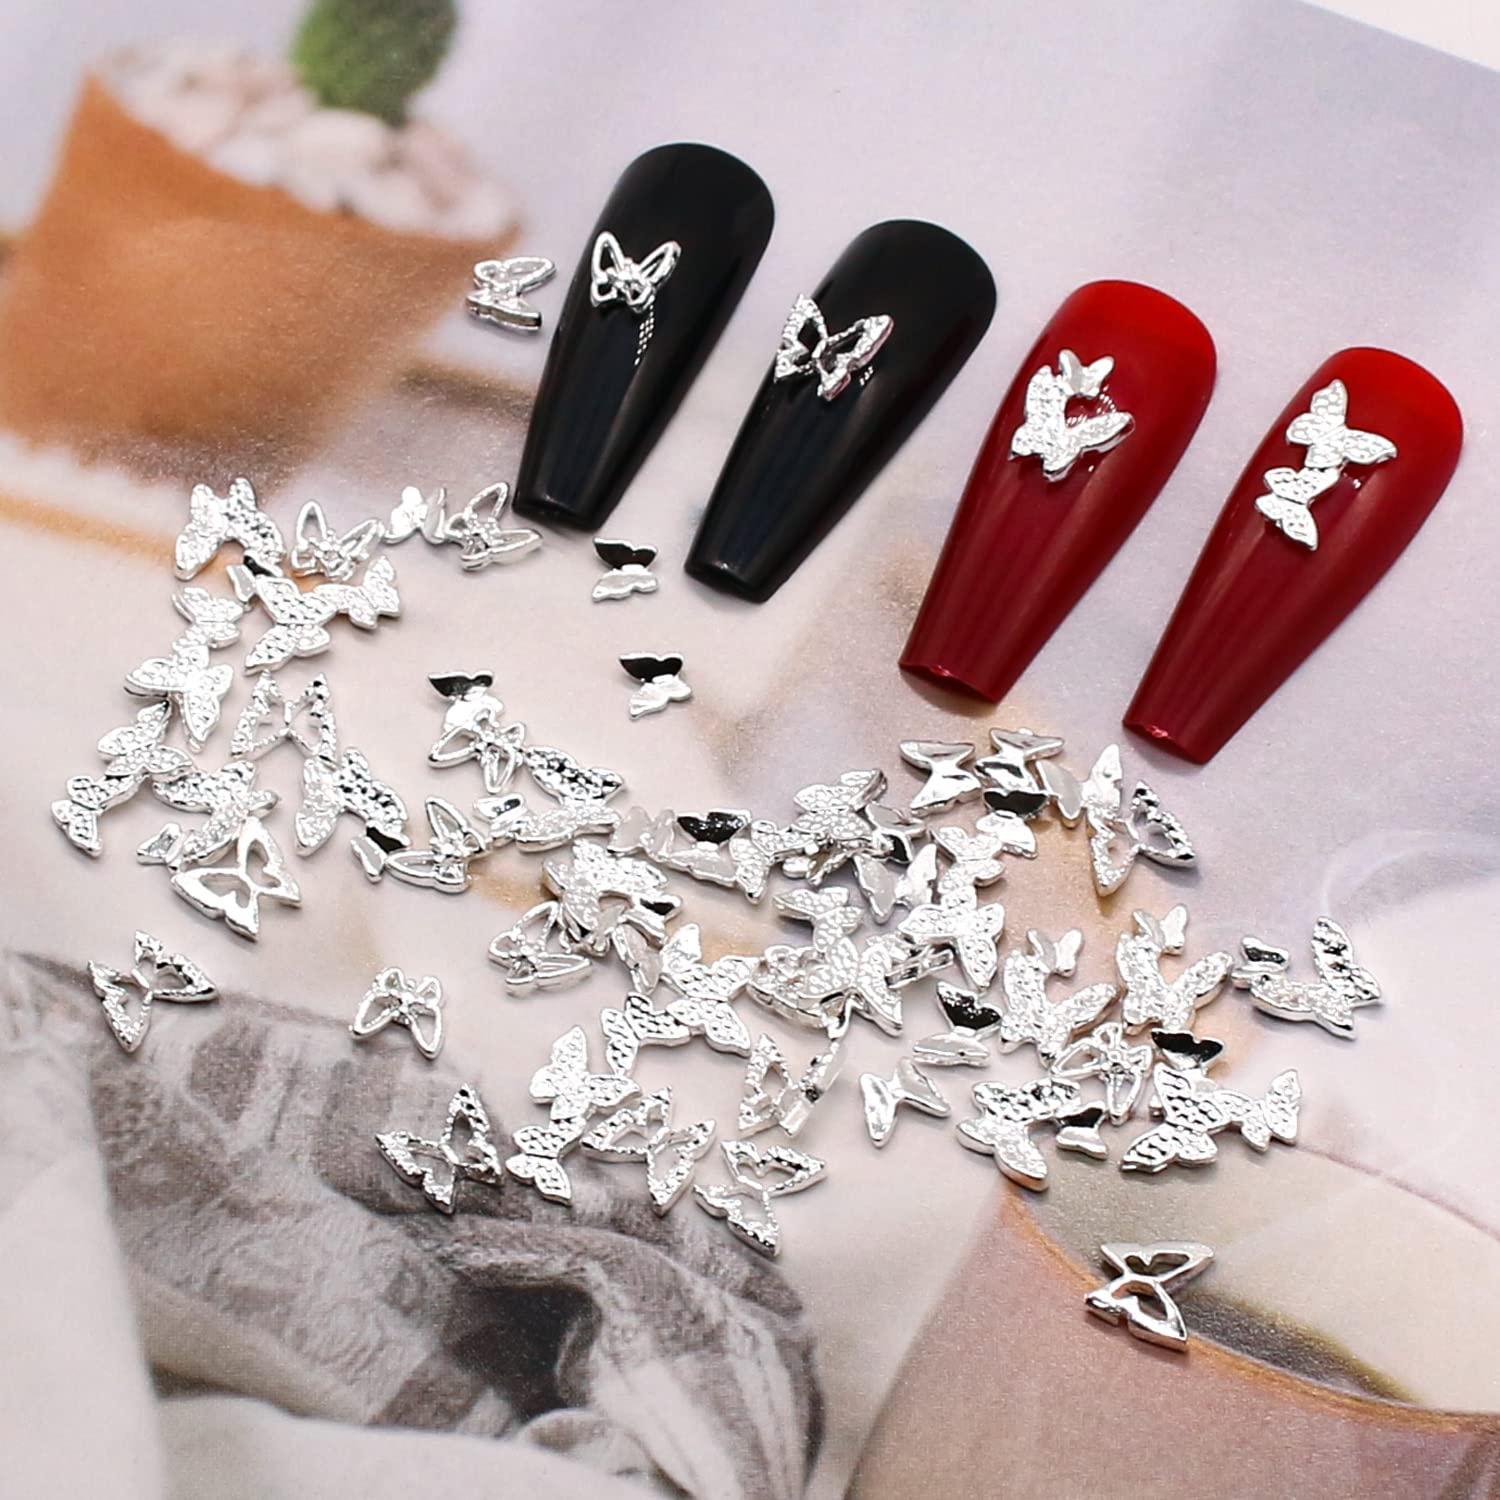 WOKOTO 20 Pcs Dangle Nail Charms for Women Nail Art Jewelrys Mix Designs  Heart Butterfly Flower Gold and Silver Nail Charms for Acrylic Nails Jewels